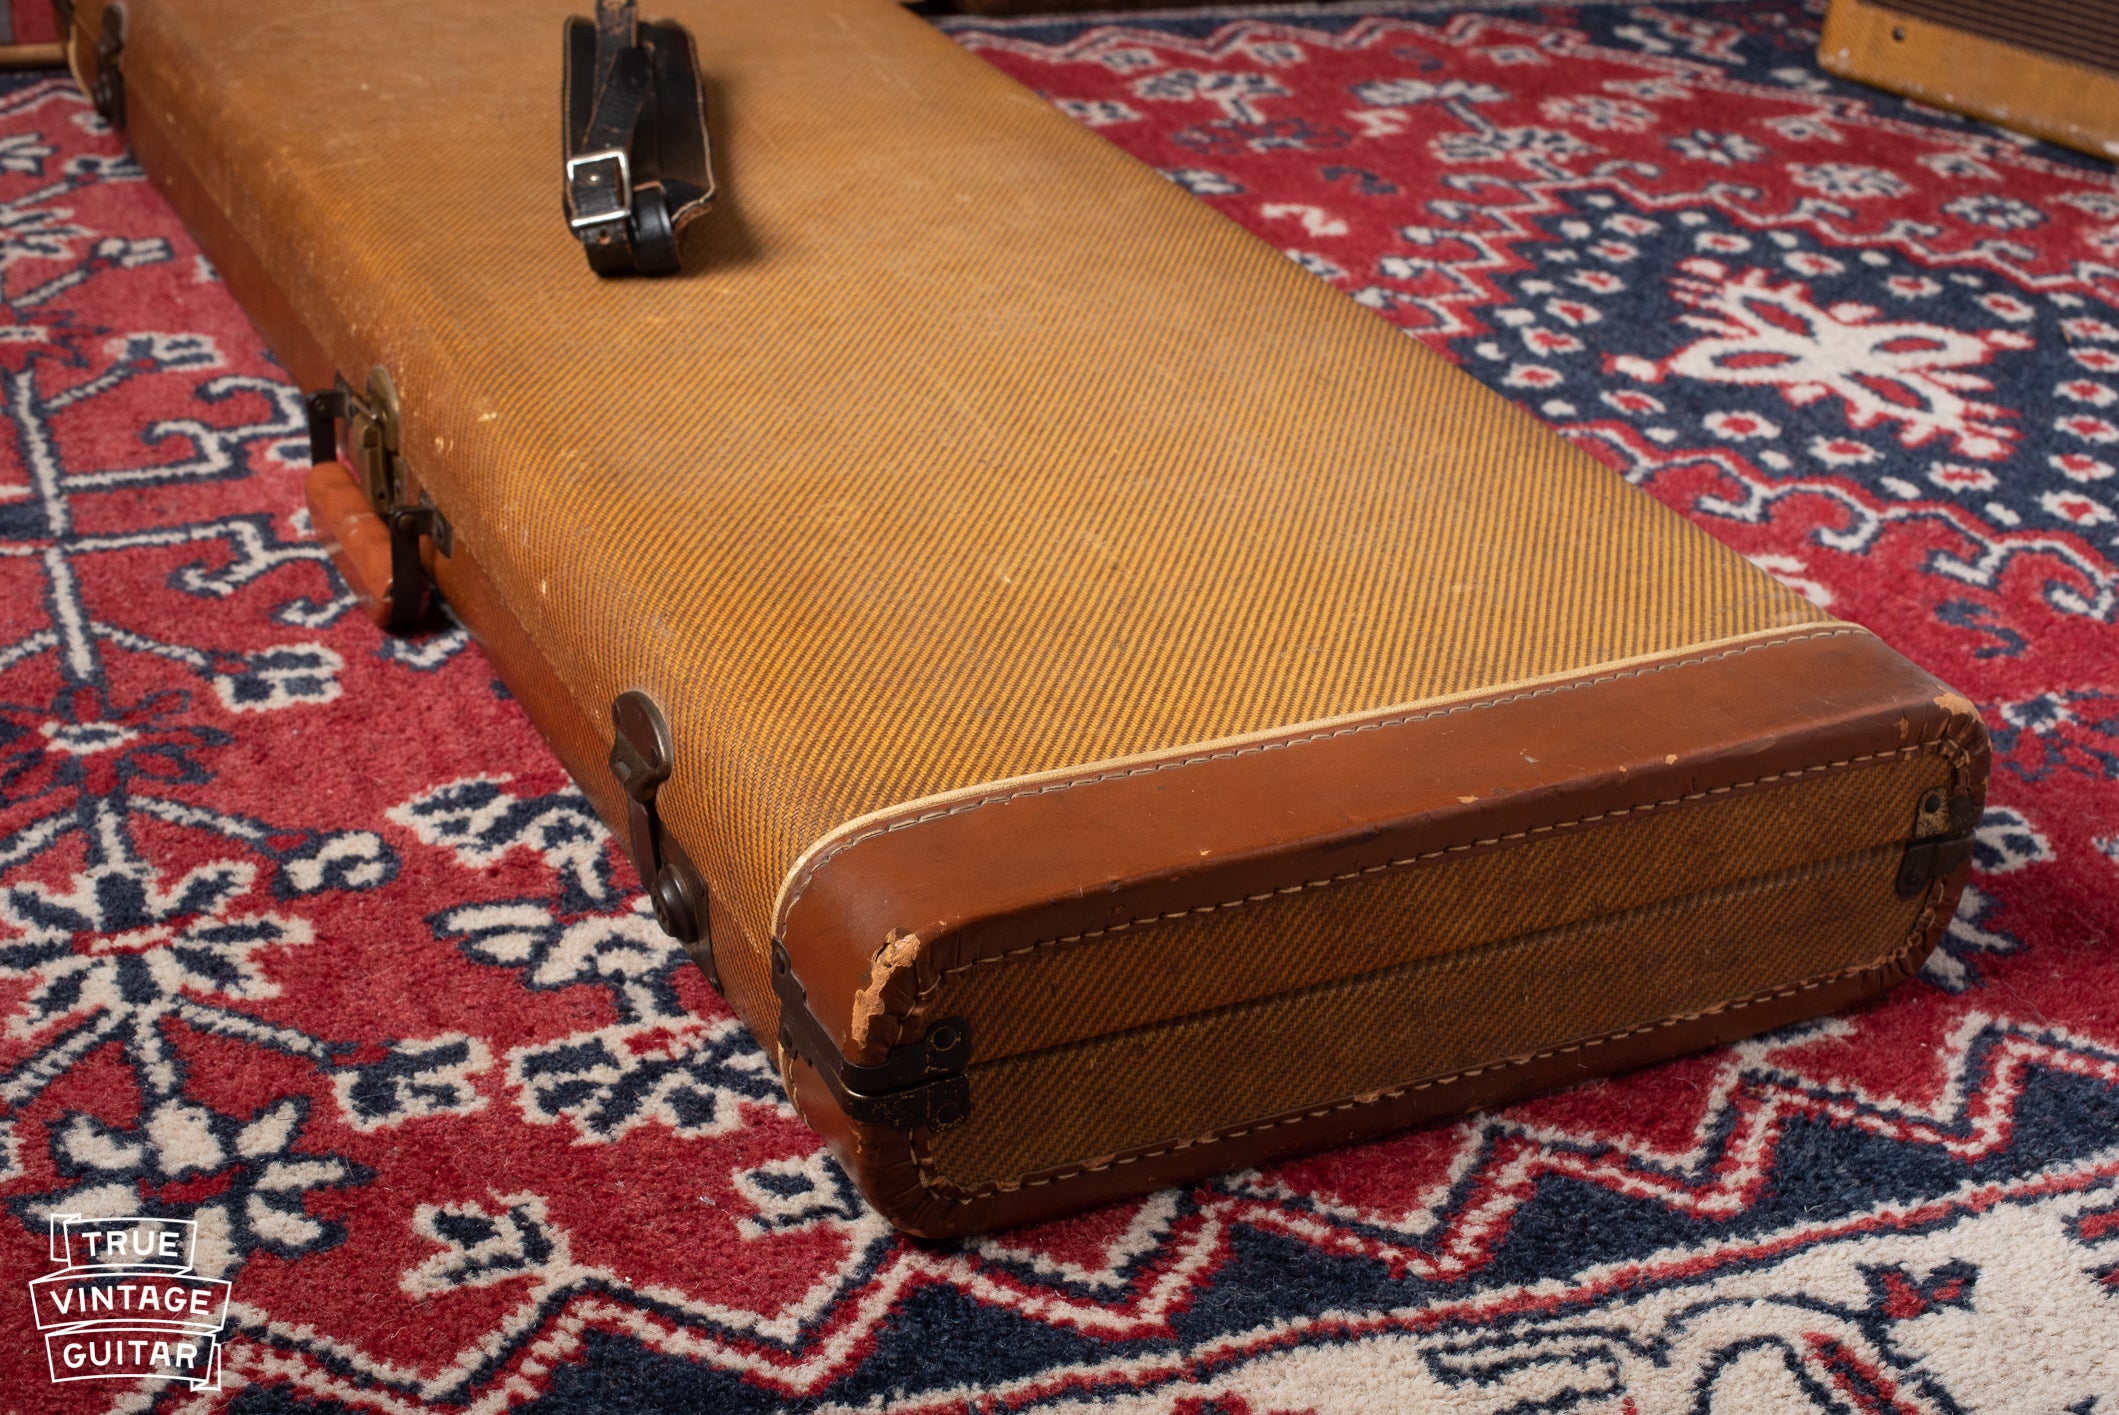 Tweed center pocket case with leather ends